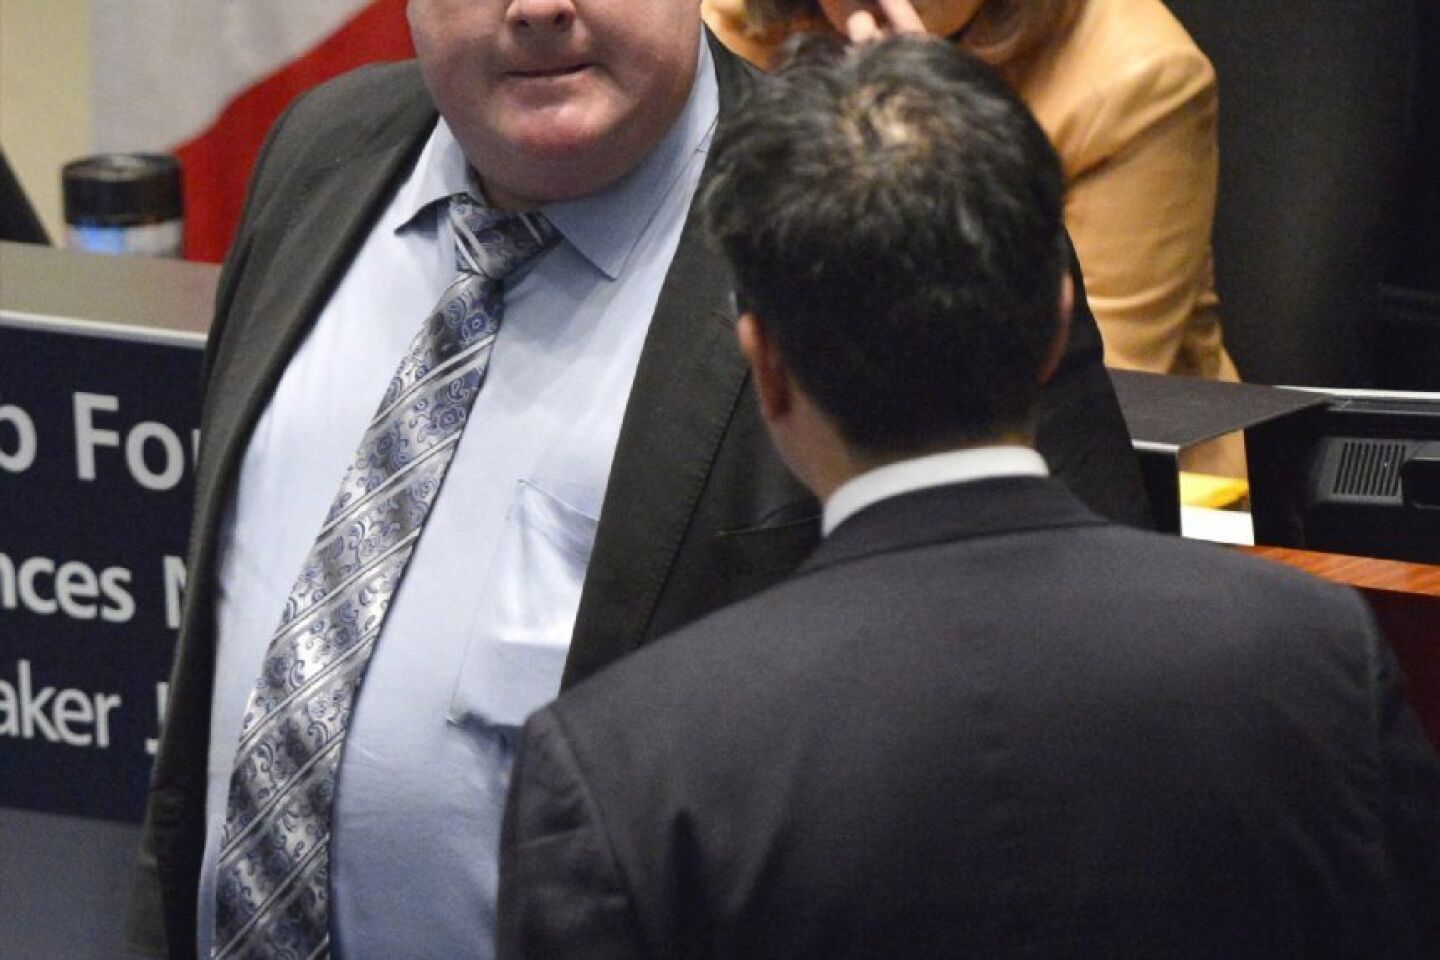 Rob Ford admits buying drugs while mayor